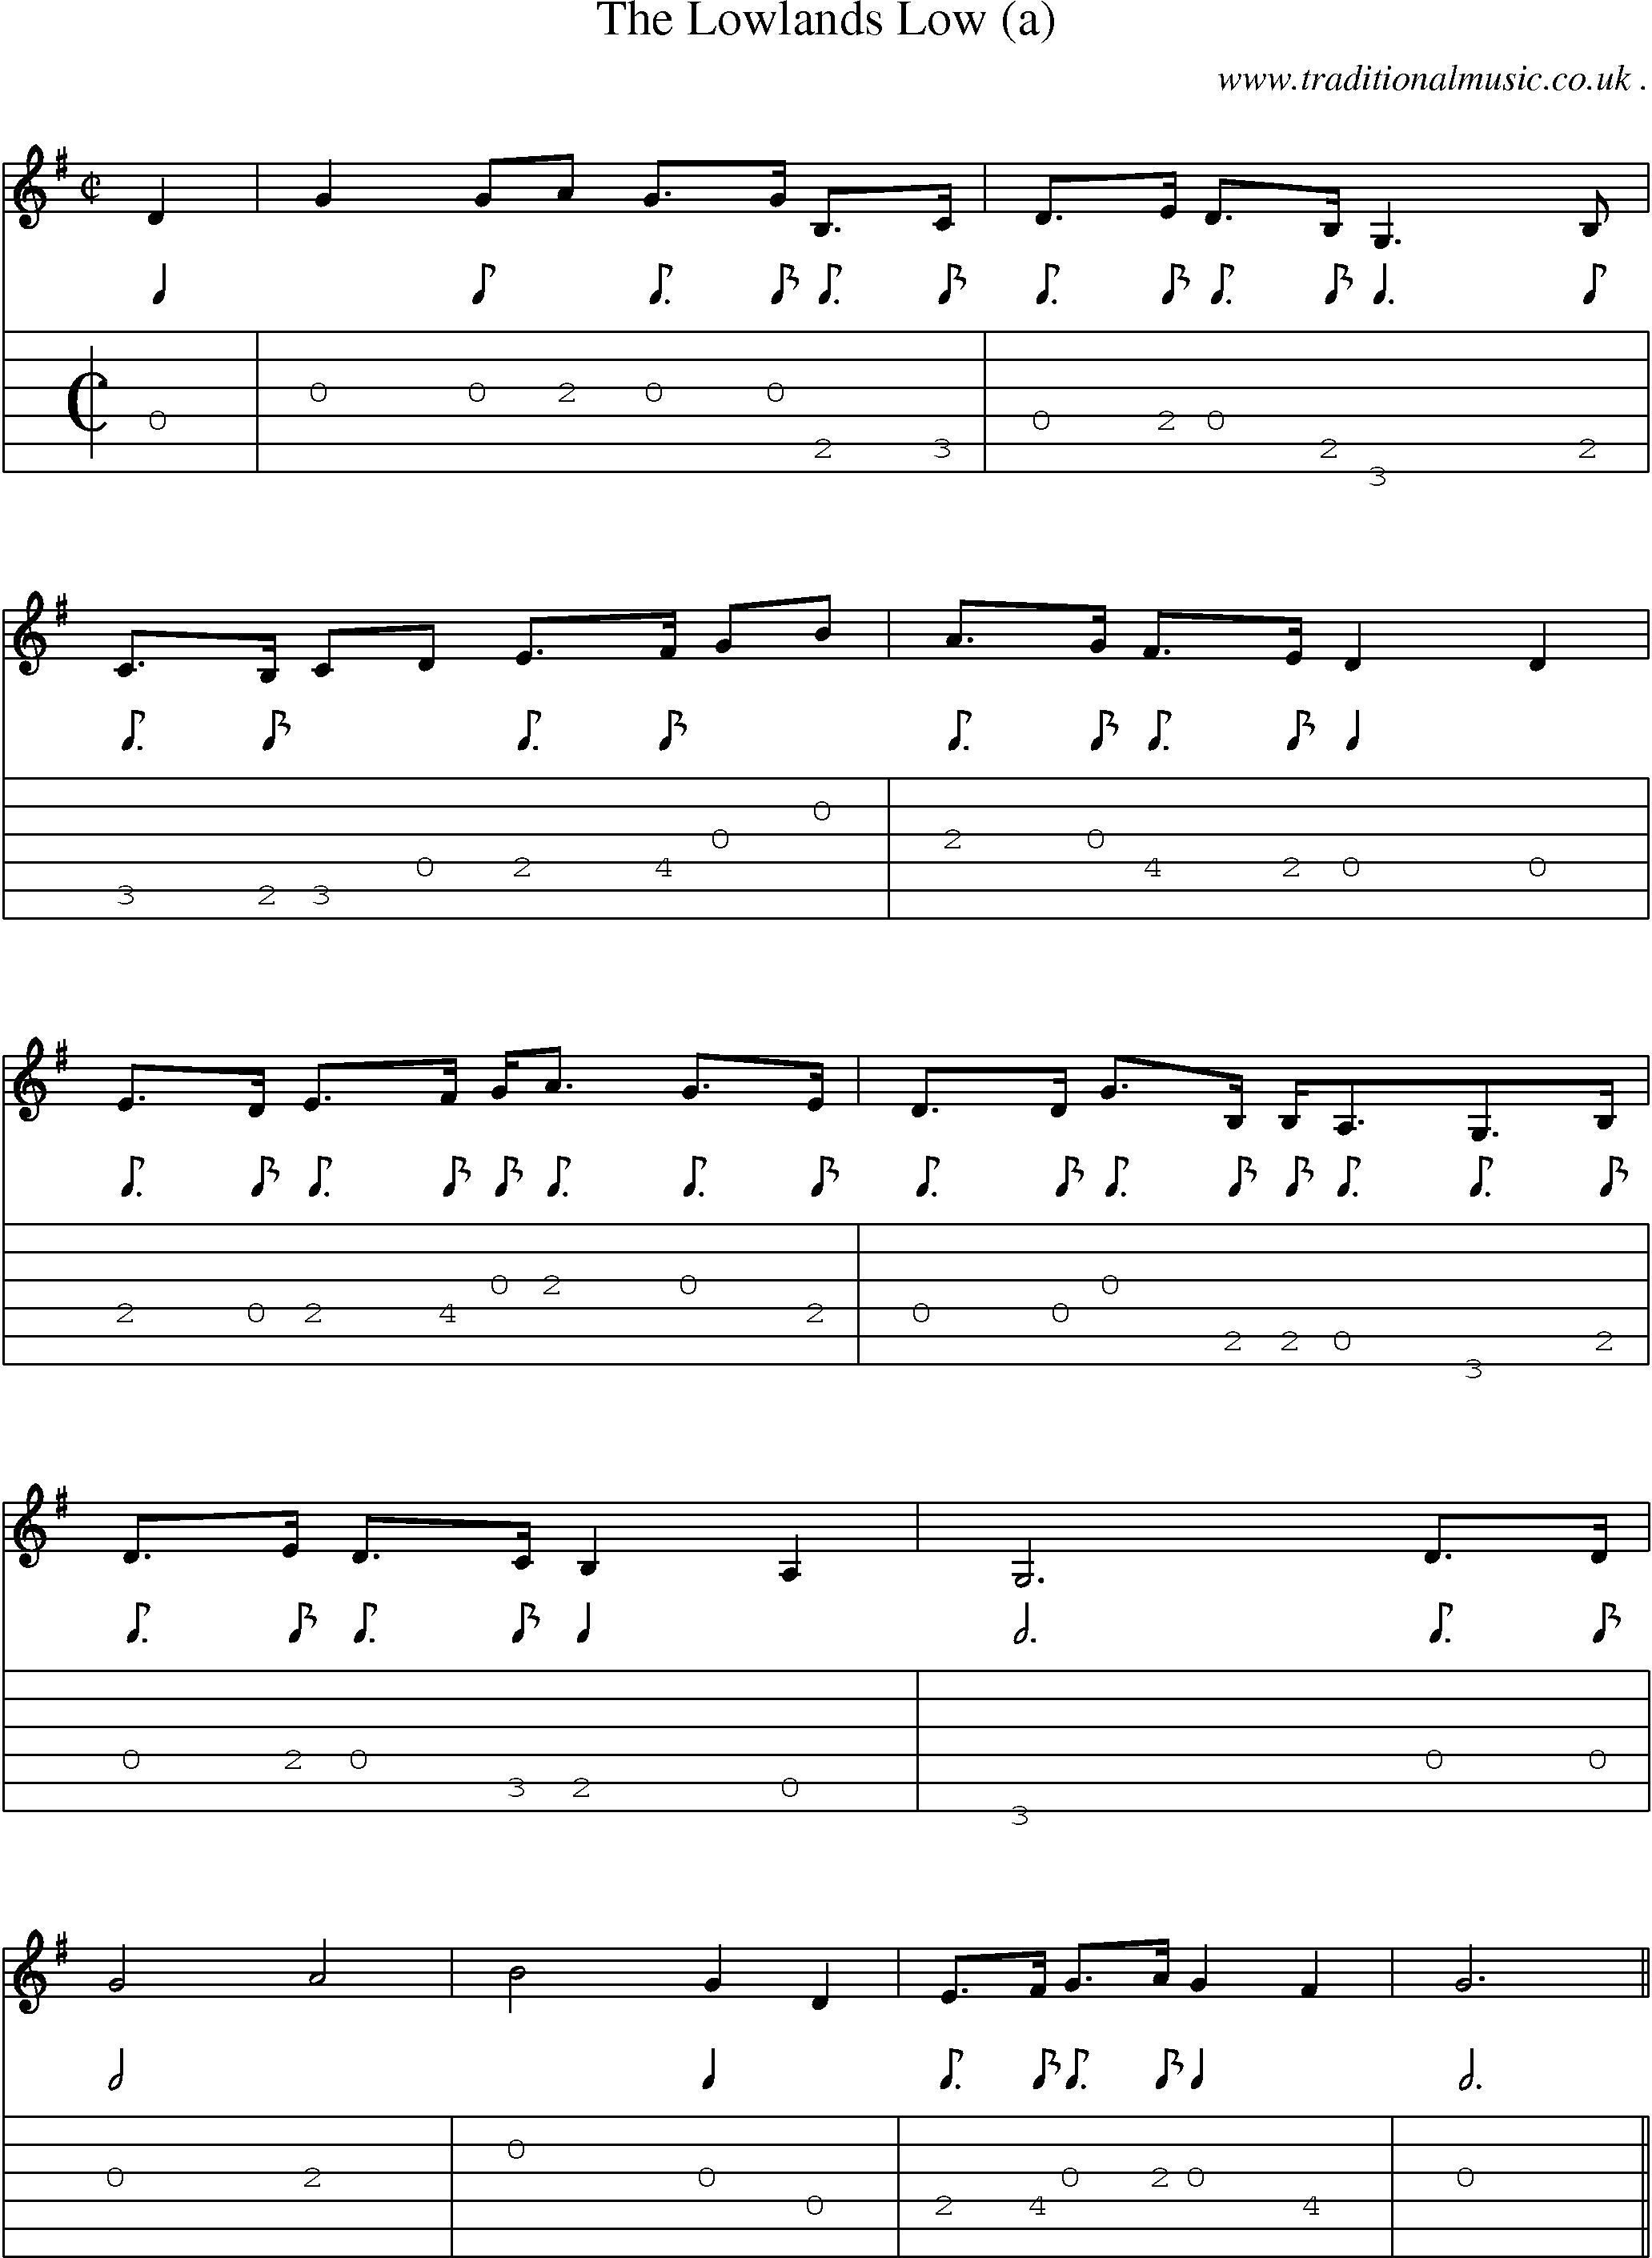 Sheet-Music and Guitar Tabs for The Lowlands Low (a)